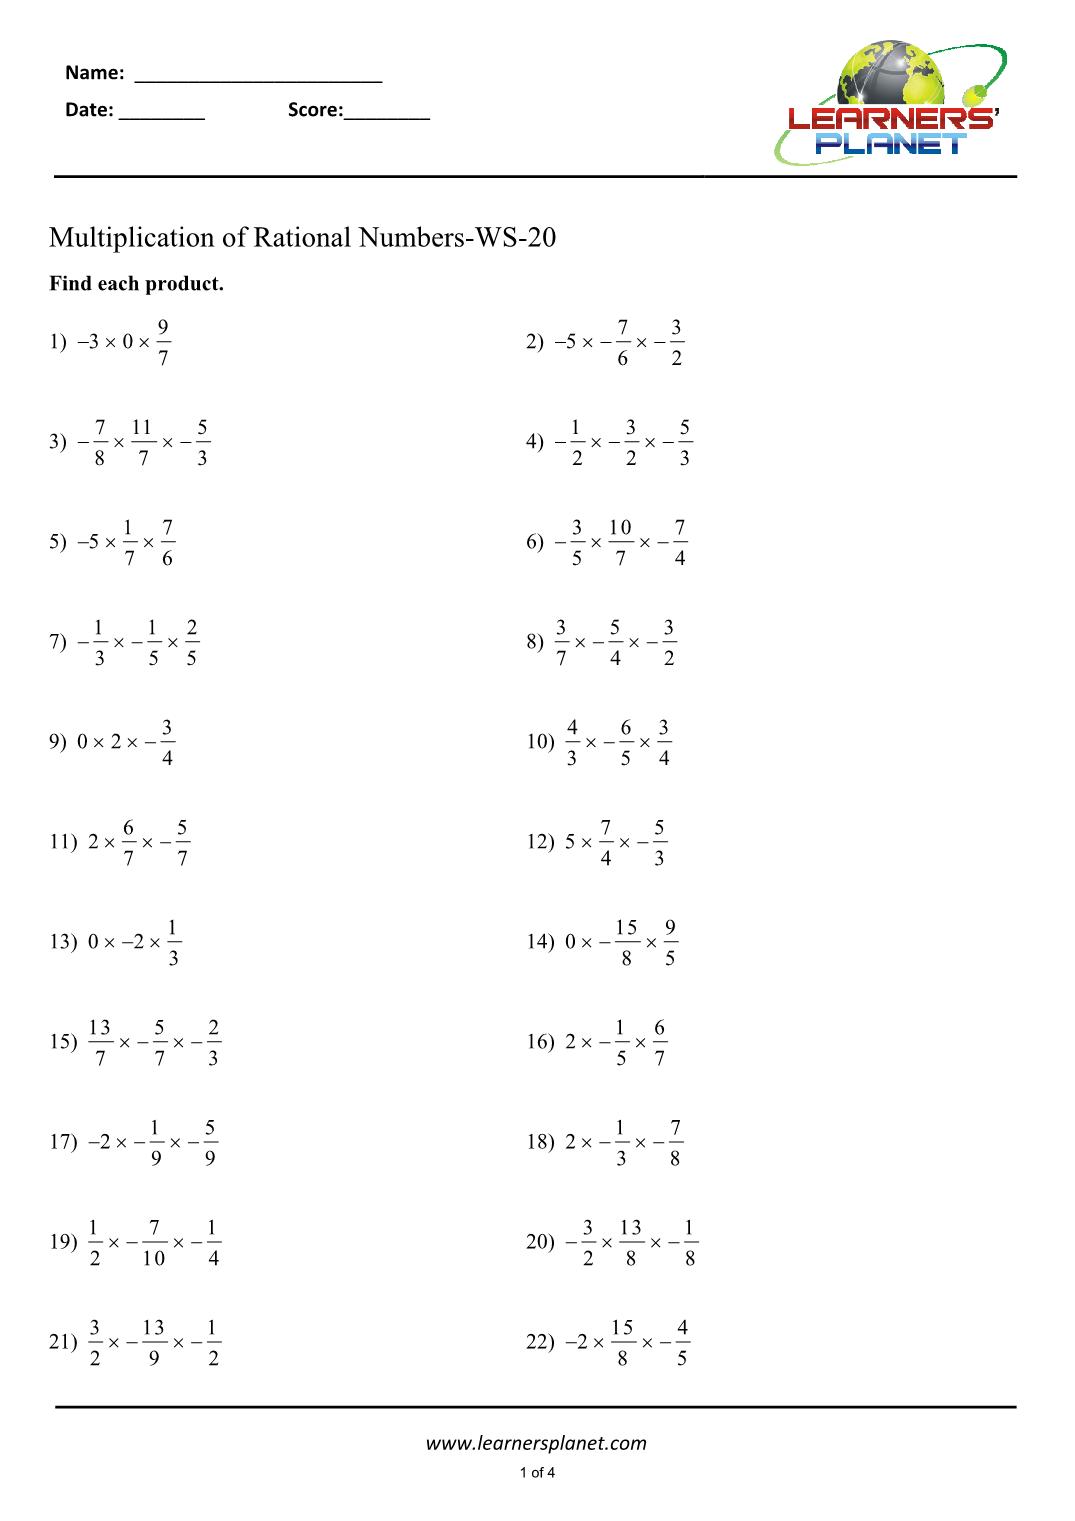 Multiplying rational numbers worksheets maths grade 24 Pertaining To Multiplying Rational Numbers Worksheet